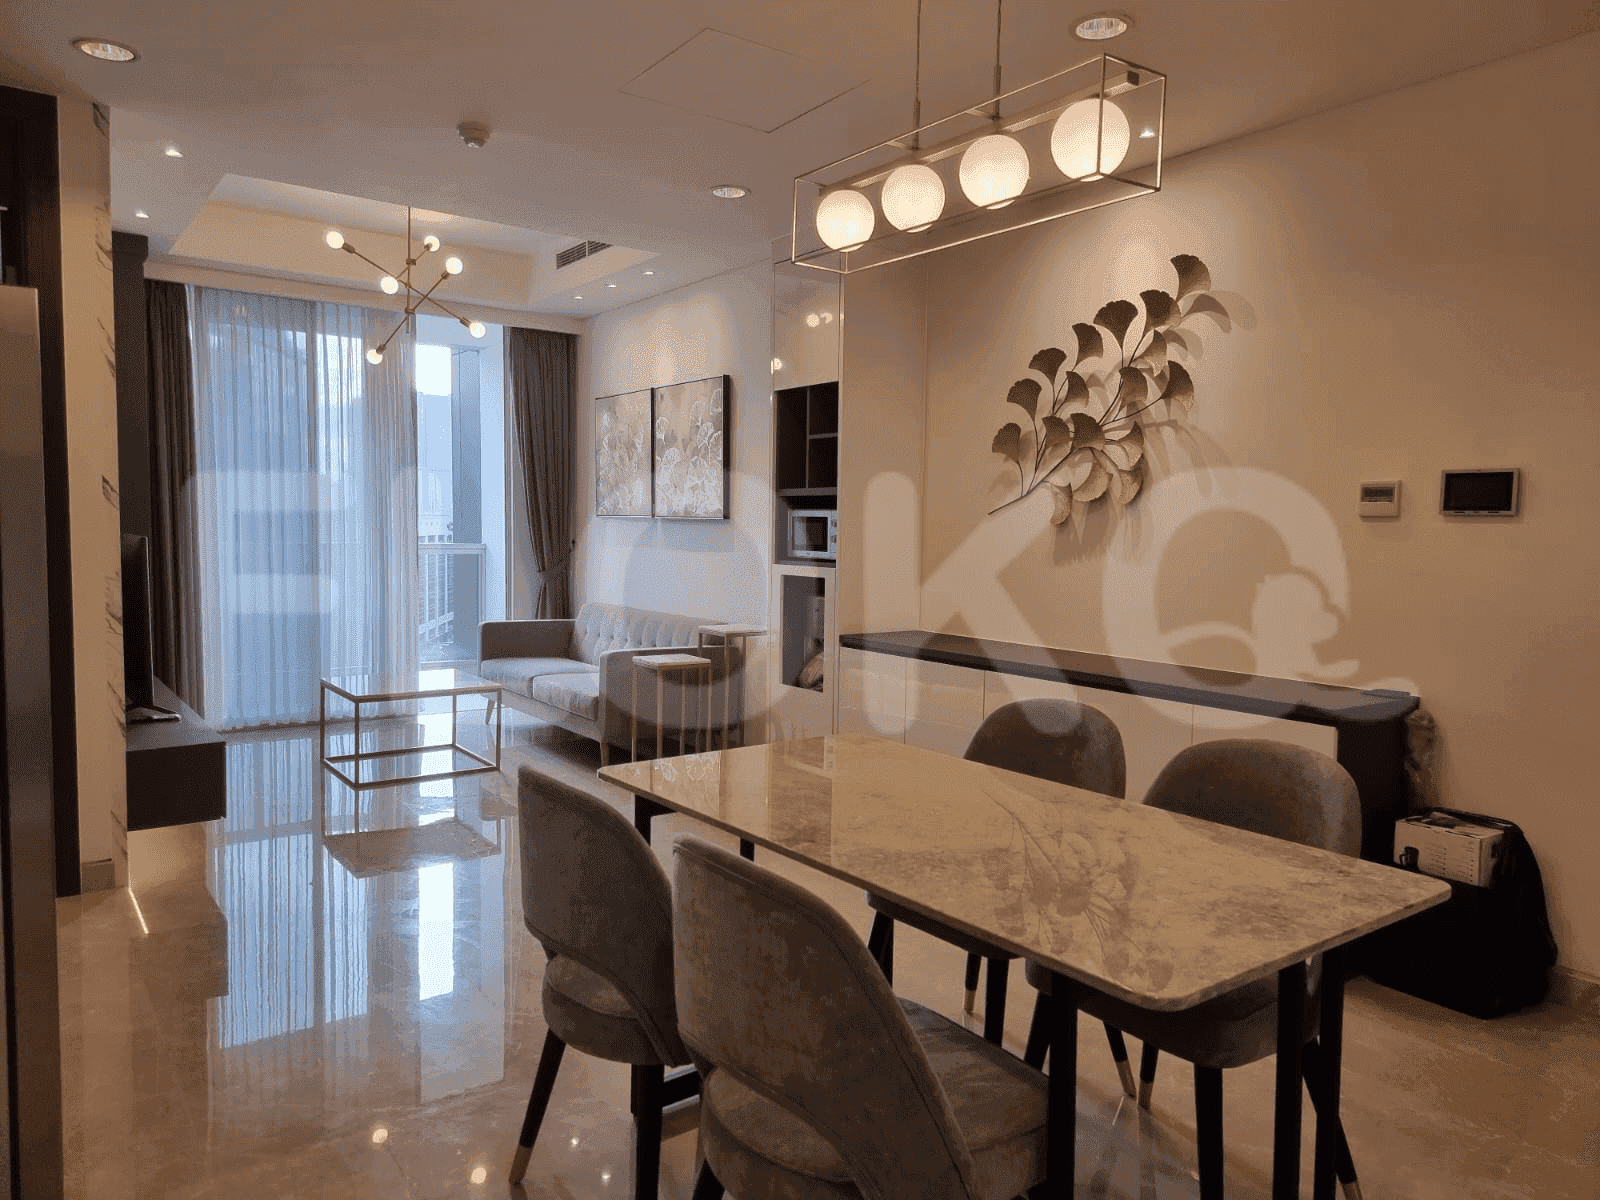 2 Bedroom on 20th Floor for Rent in The Elements Kuningan Apartment - fkuc89 2